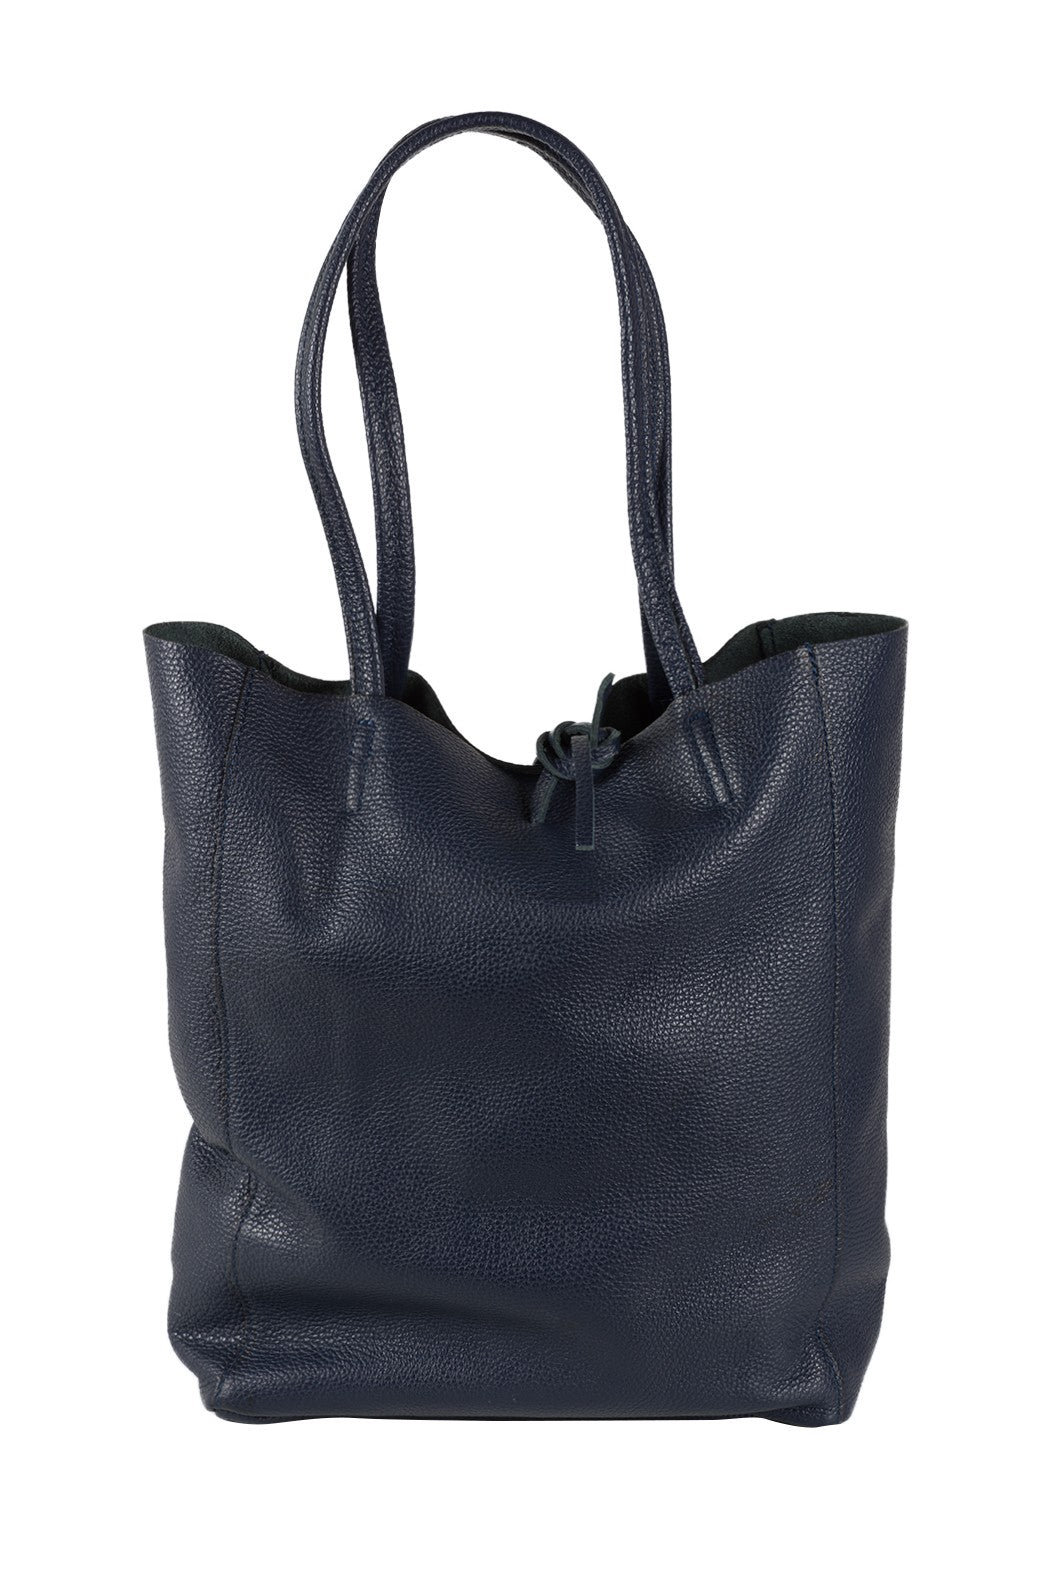 Italian leather shopper tote bag tie top navy